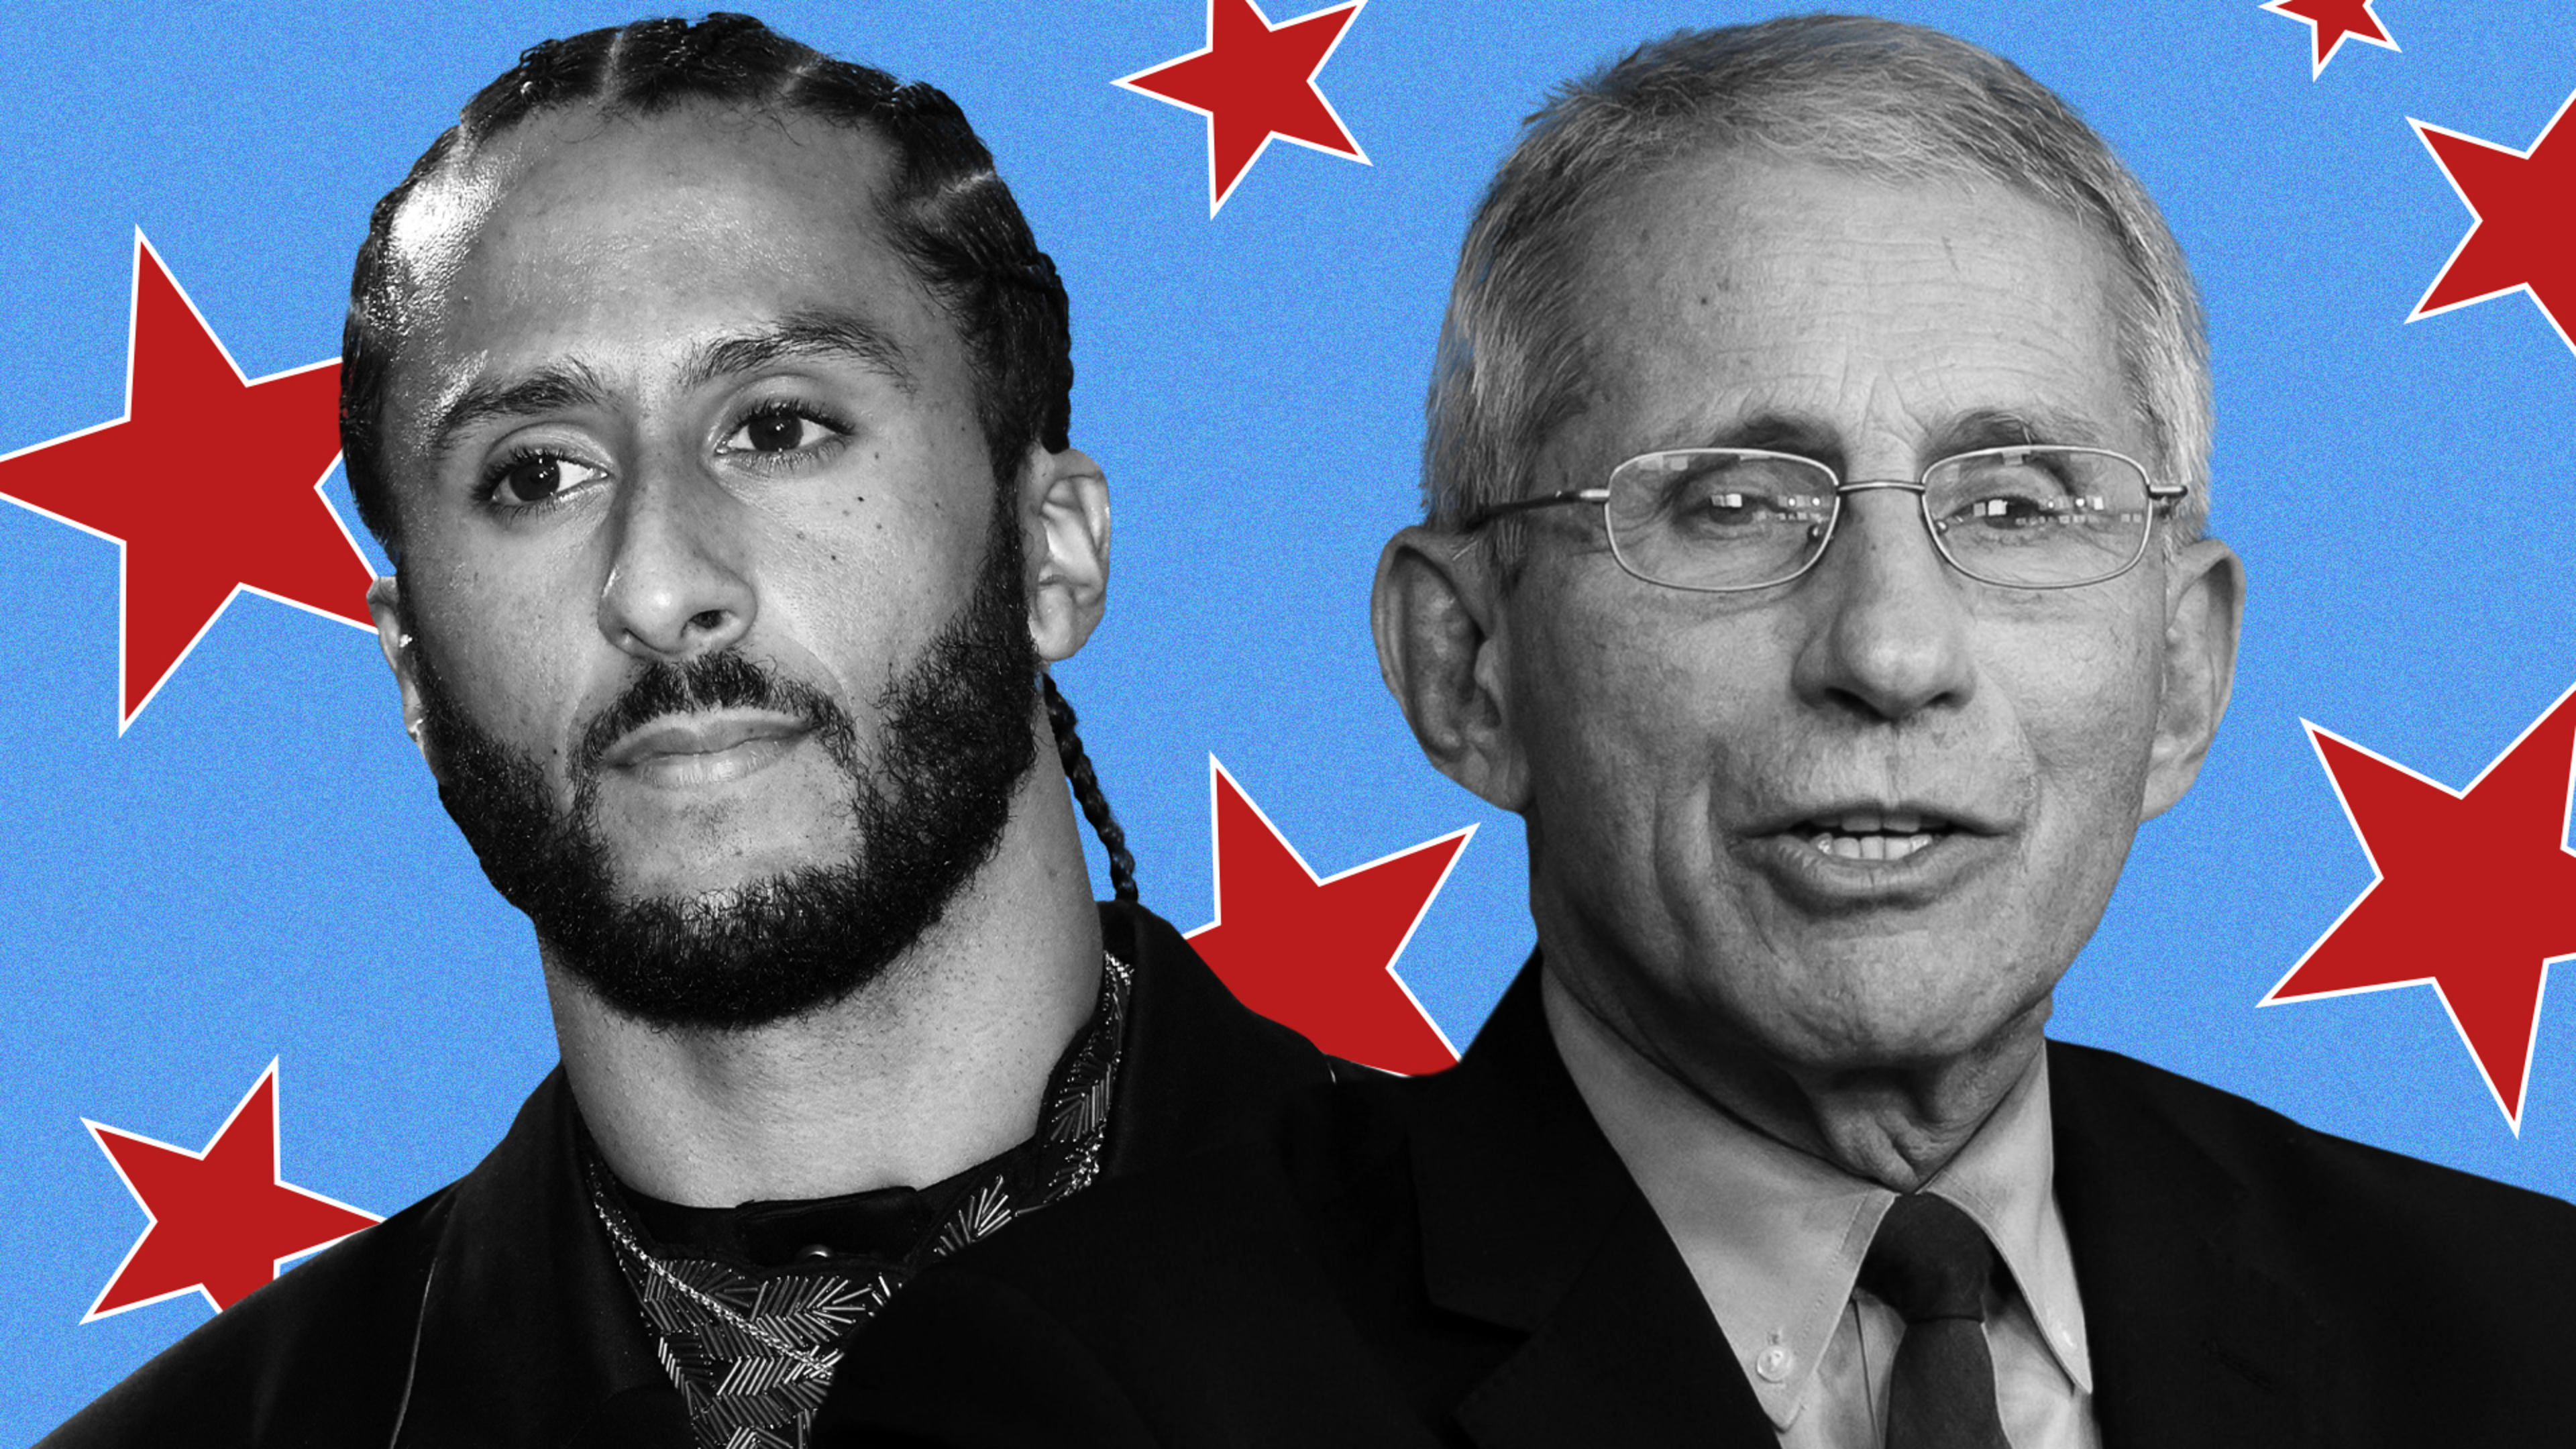 Anthony Fauci and Colin Kaepernick are getting RFK human rights awards